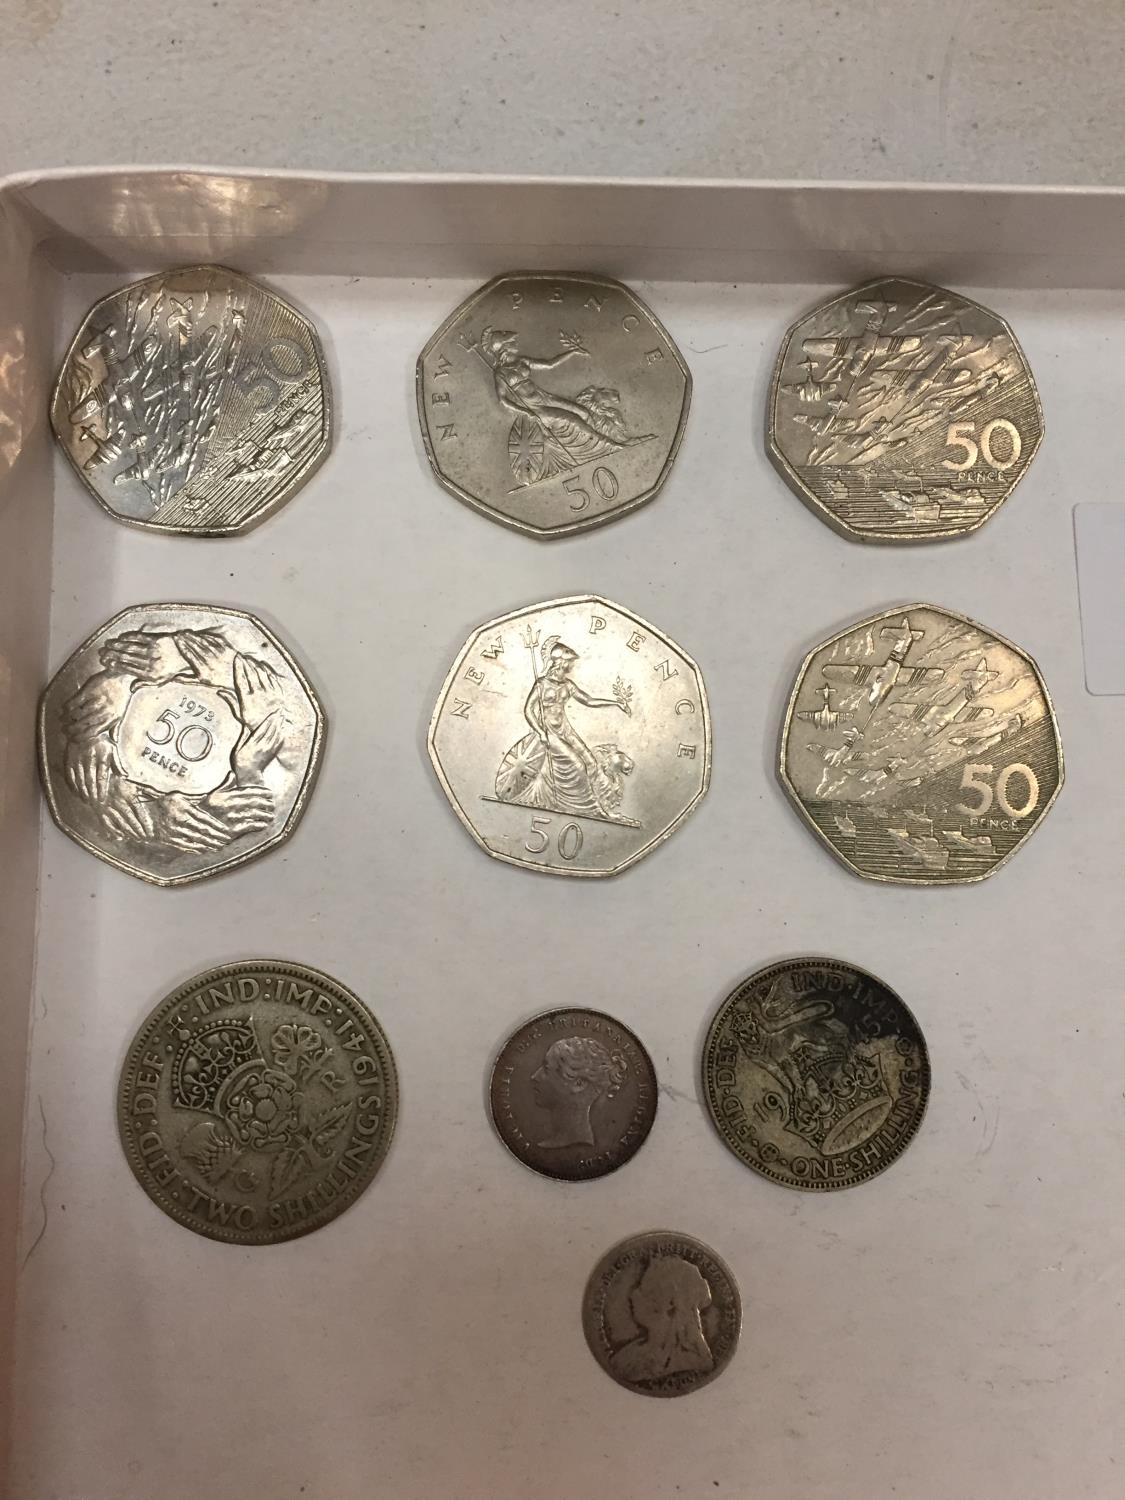 TEN VARIOUS COINS - SIX DECIMAL 50 P, 1884 MAUNDY 4 P, 1941 FLORIN, 1945 SHILLING AND 1897 3 d - Image 2 of 3